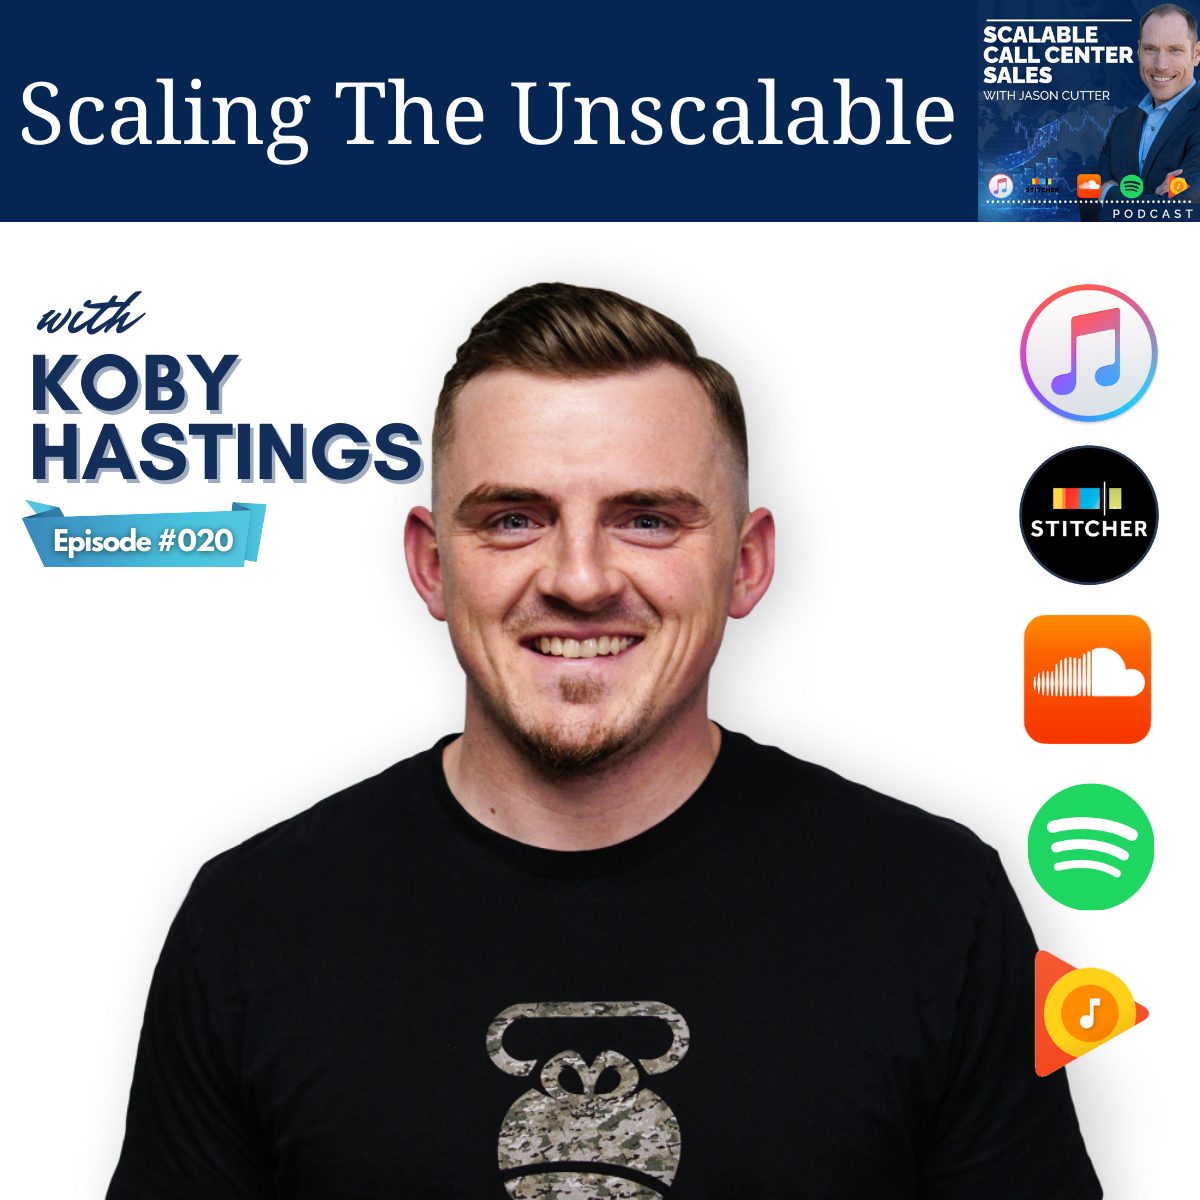 [E20] Scaling The Unscalable, with Koby Hastings from LeadRilla